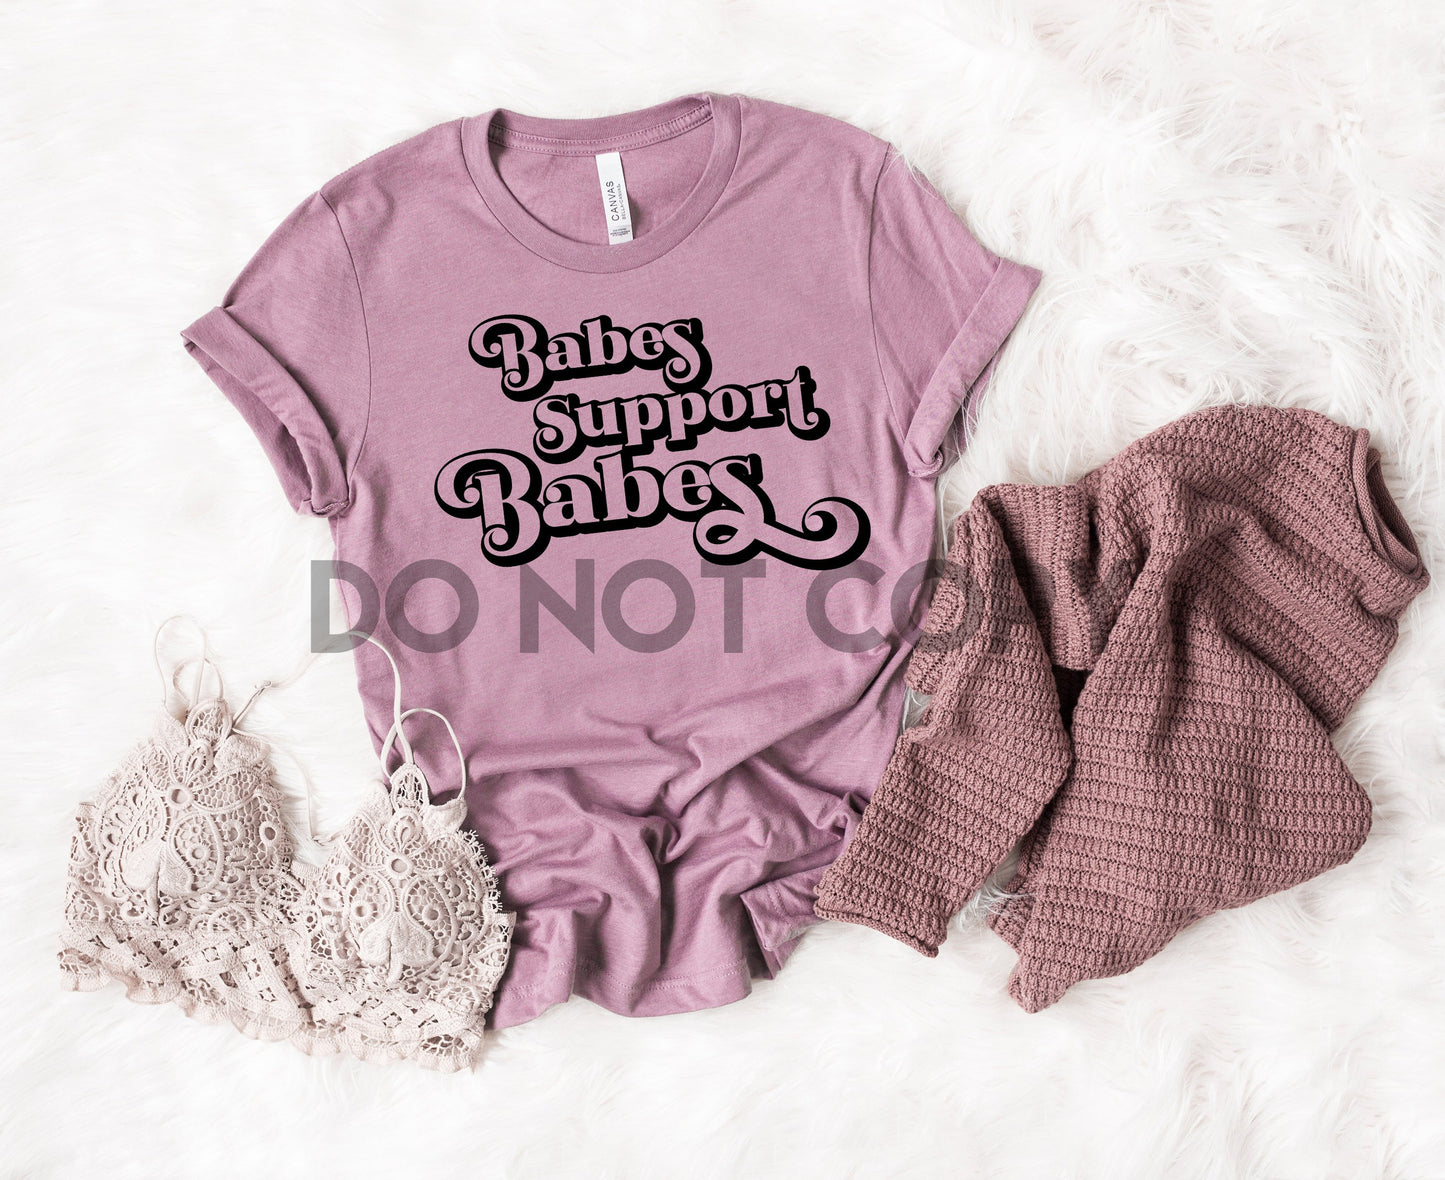 Babes support babes retro font one color Screen Print transfer